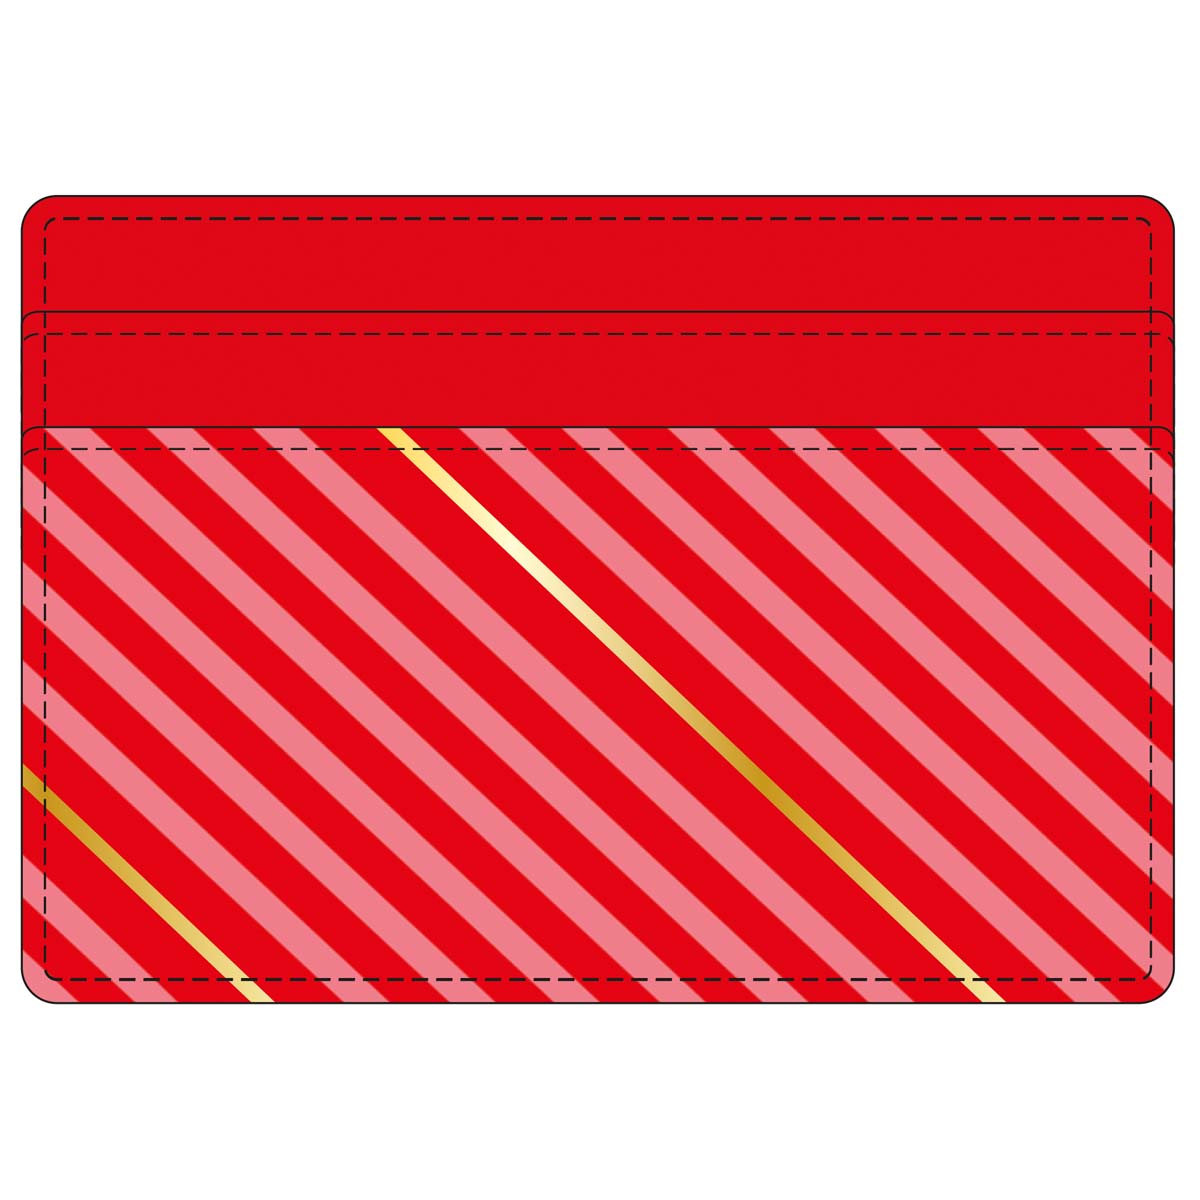 Card holder - red and pink stripes